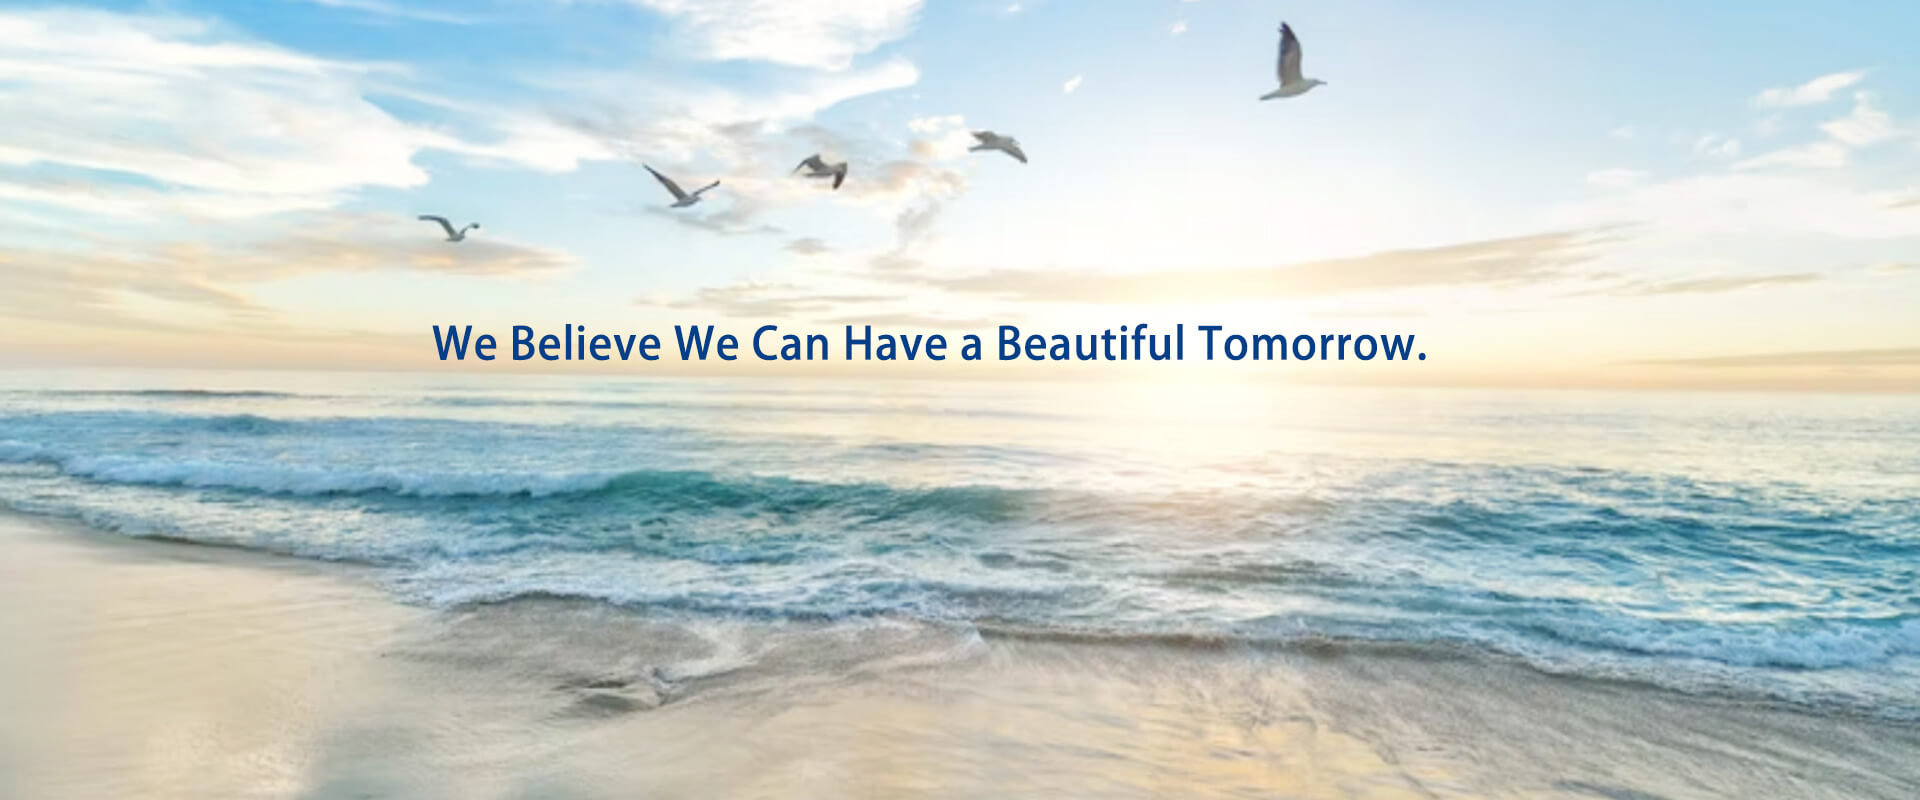 We Believe We Can Have a Beautiful Tomorrow.